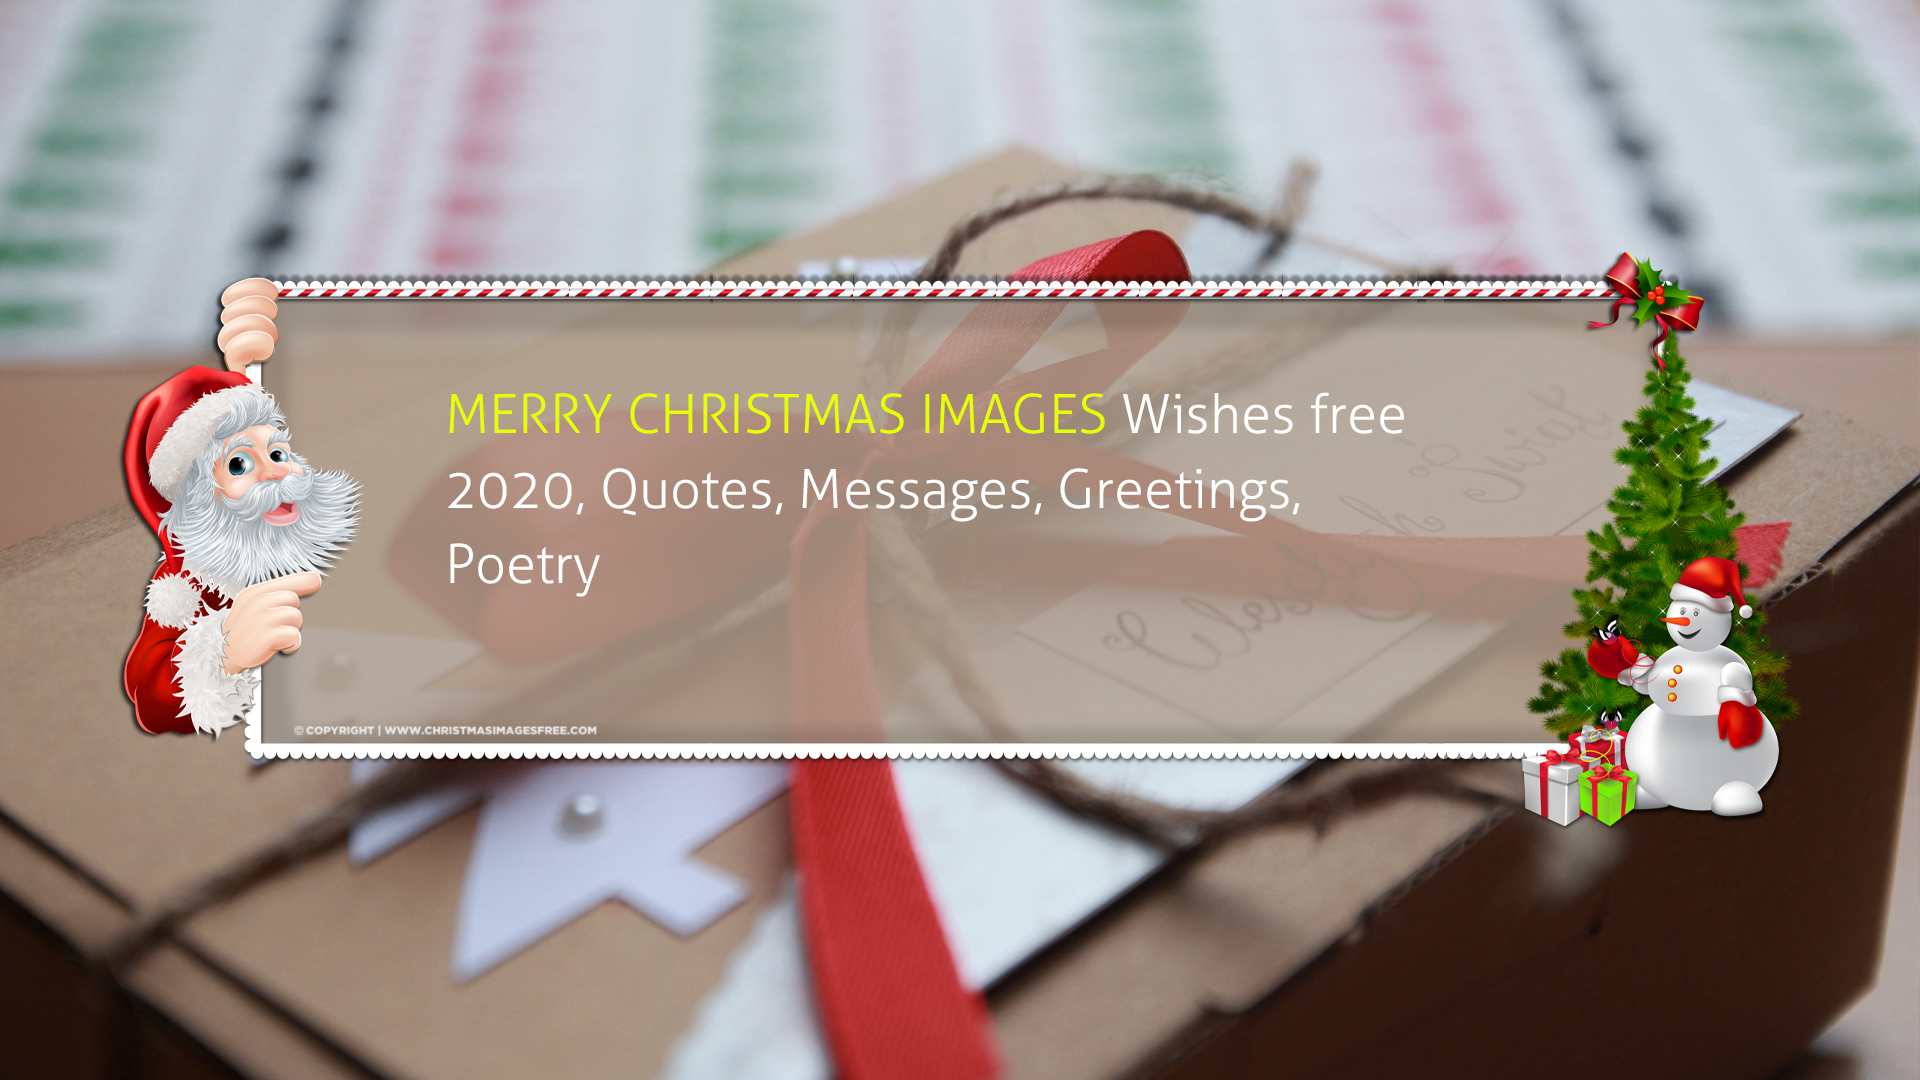 Merry Christmas Images Wishes free 2021, Quotes, Messages ...